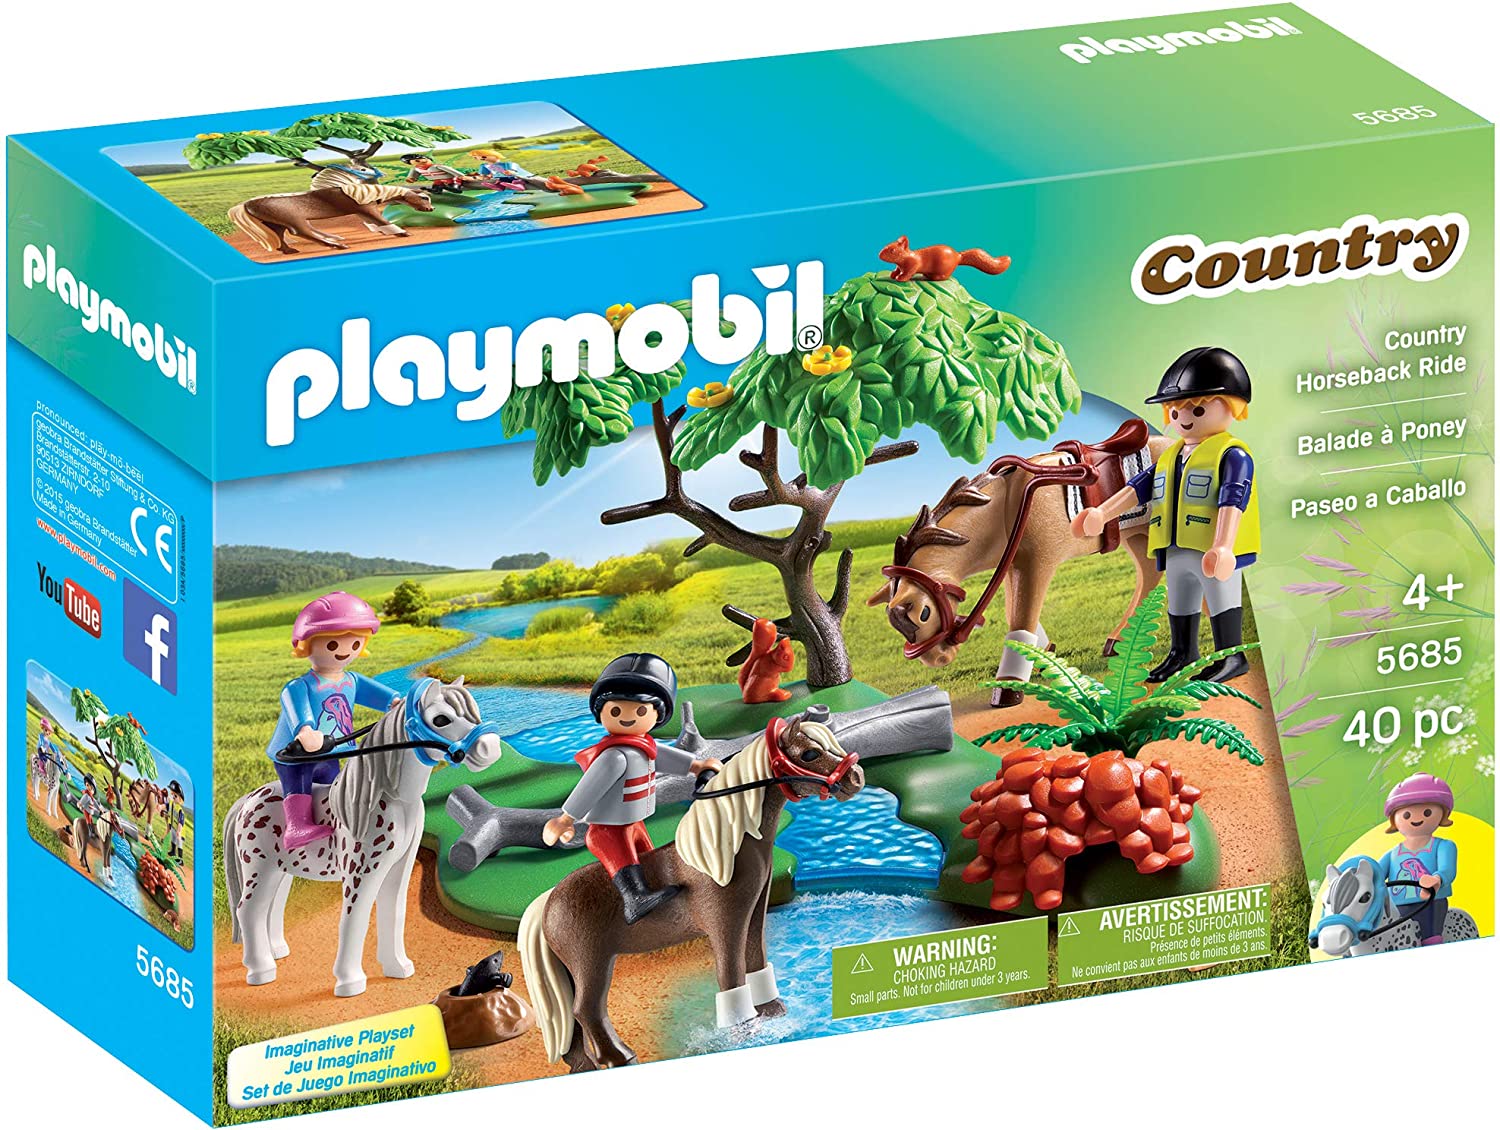 Playmobil Country Horseback Ride Construction Toy